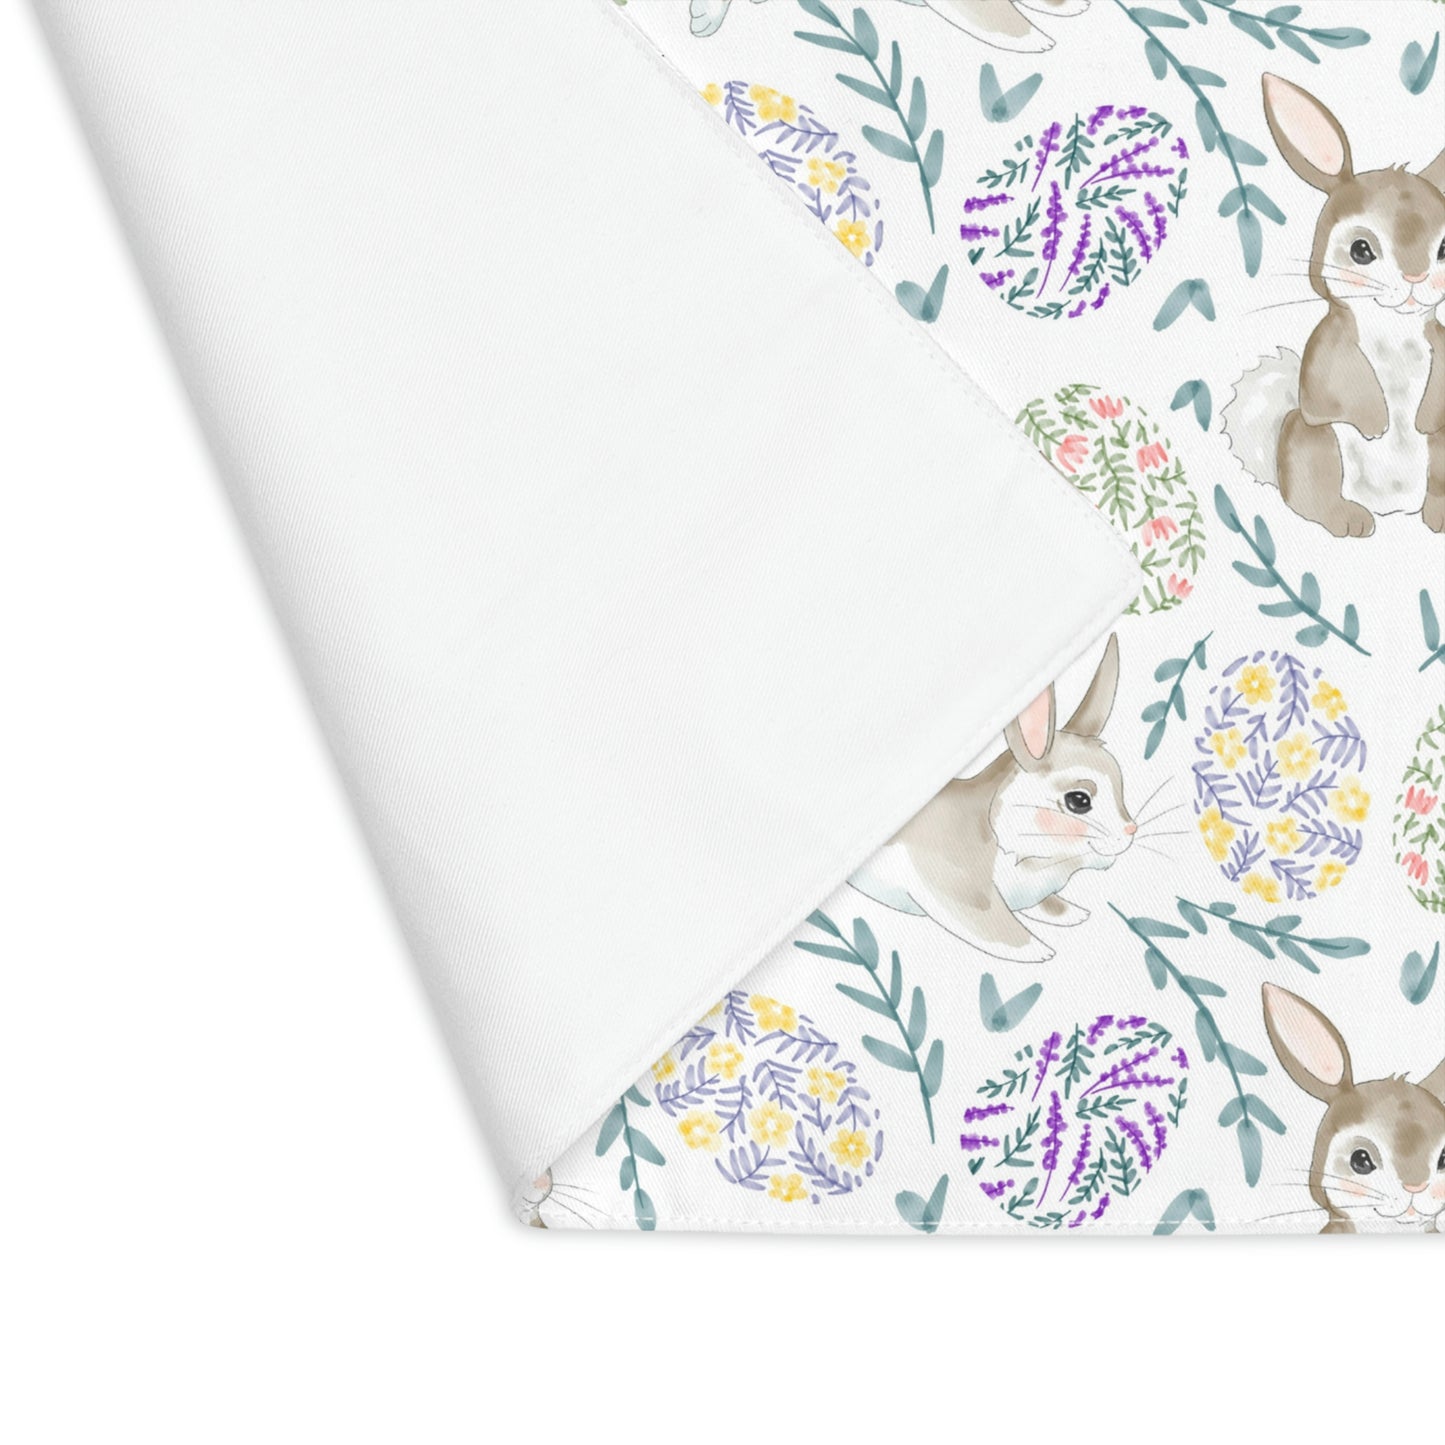 Bunnies and Easter Eggs Placemat